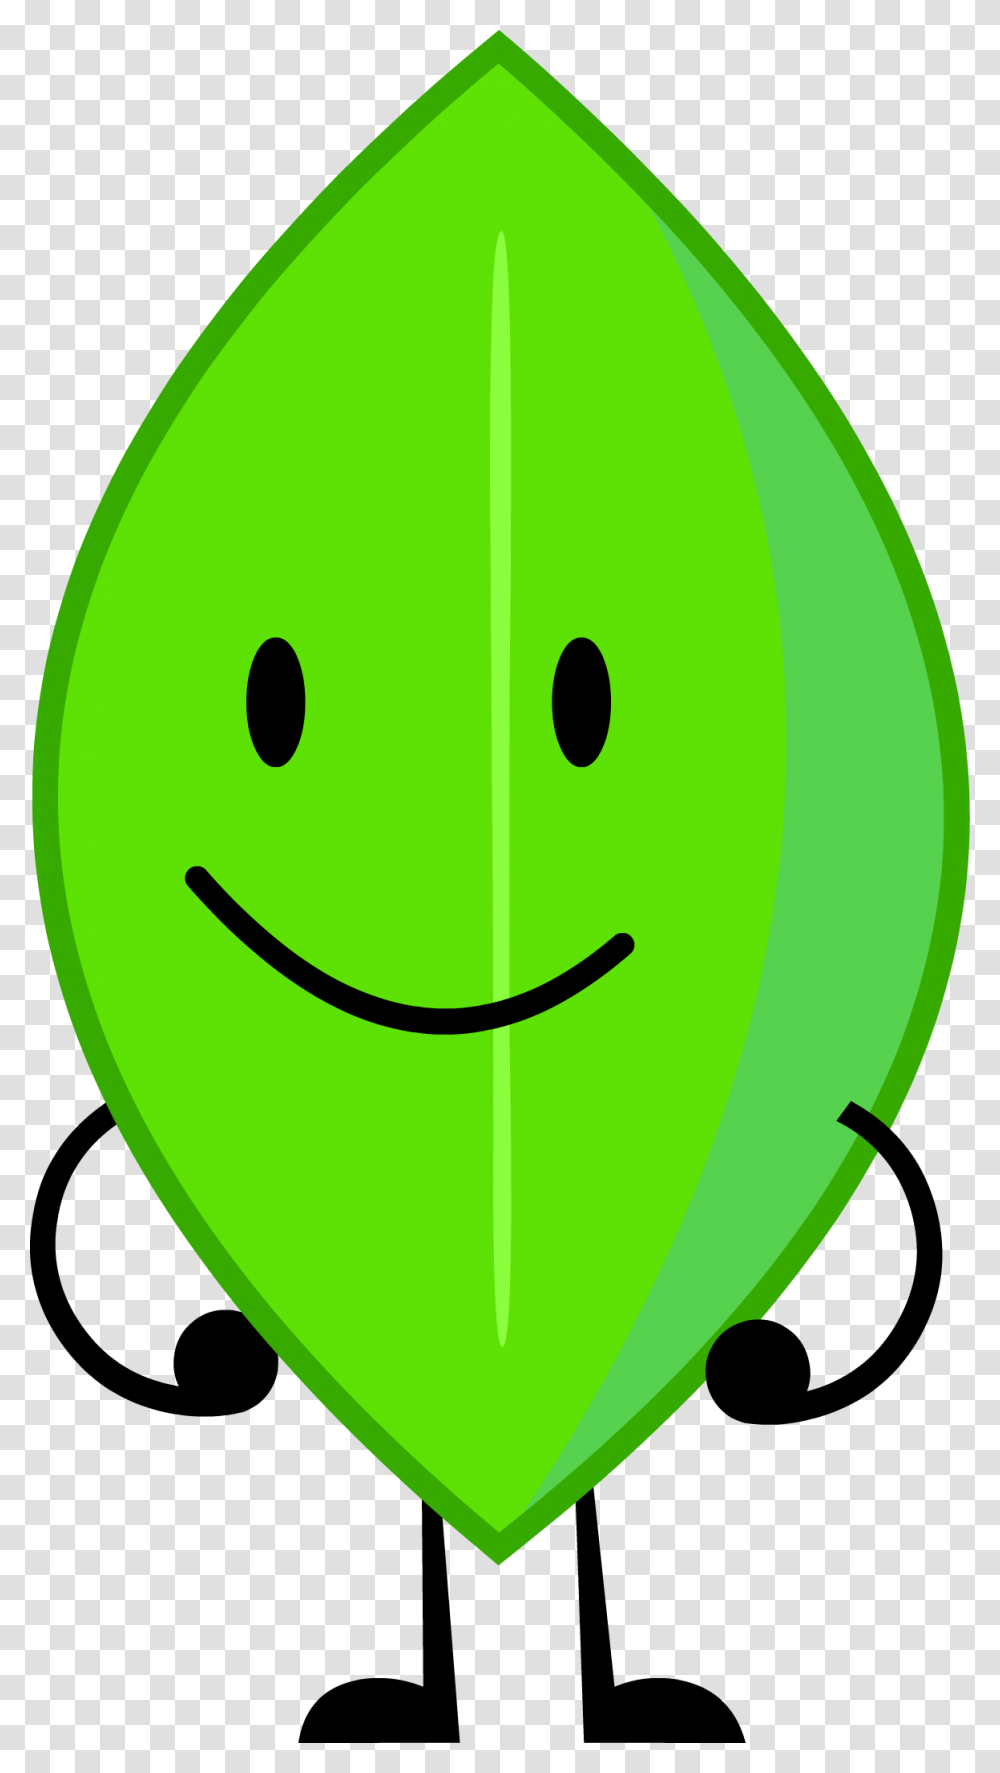 Bfdi Leafy, Ball, Balloon, Green Transparent Png